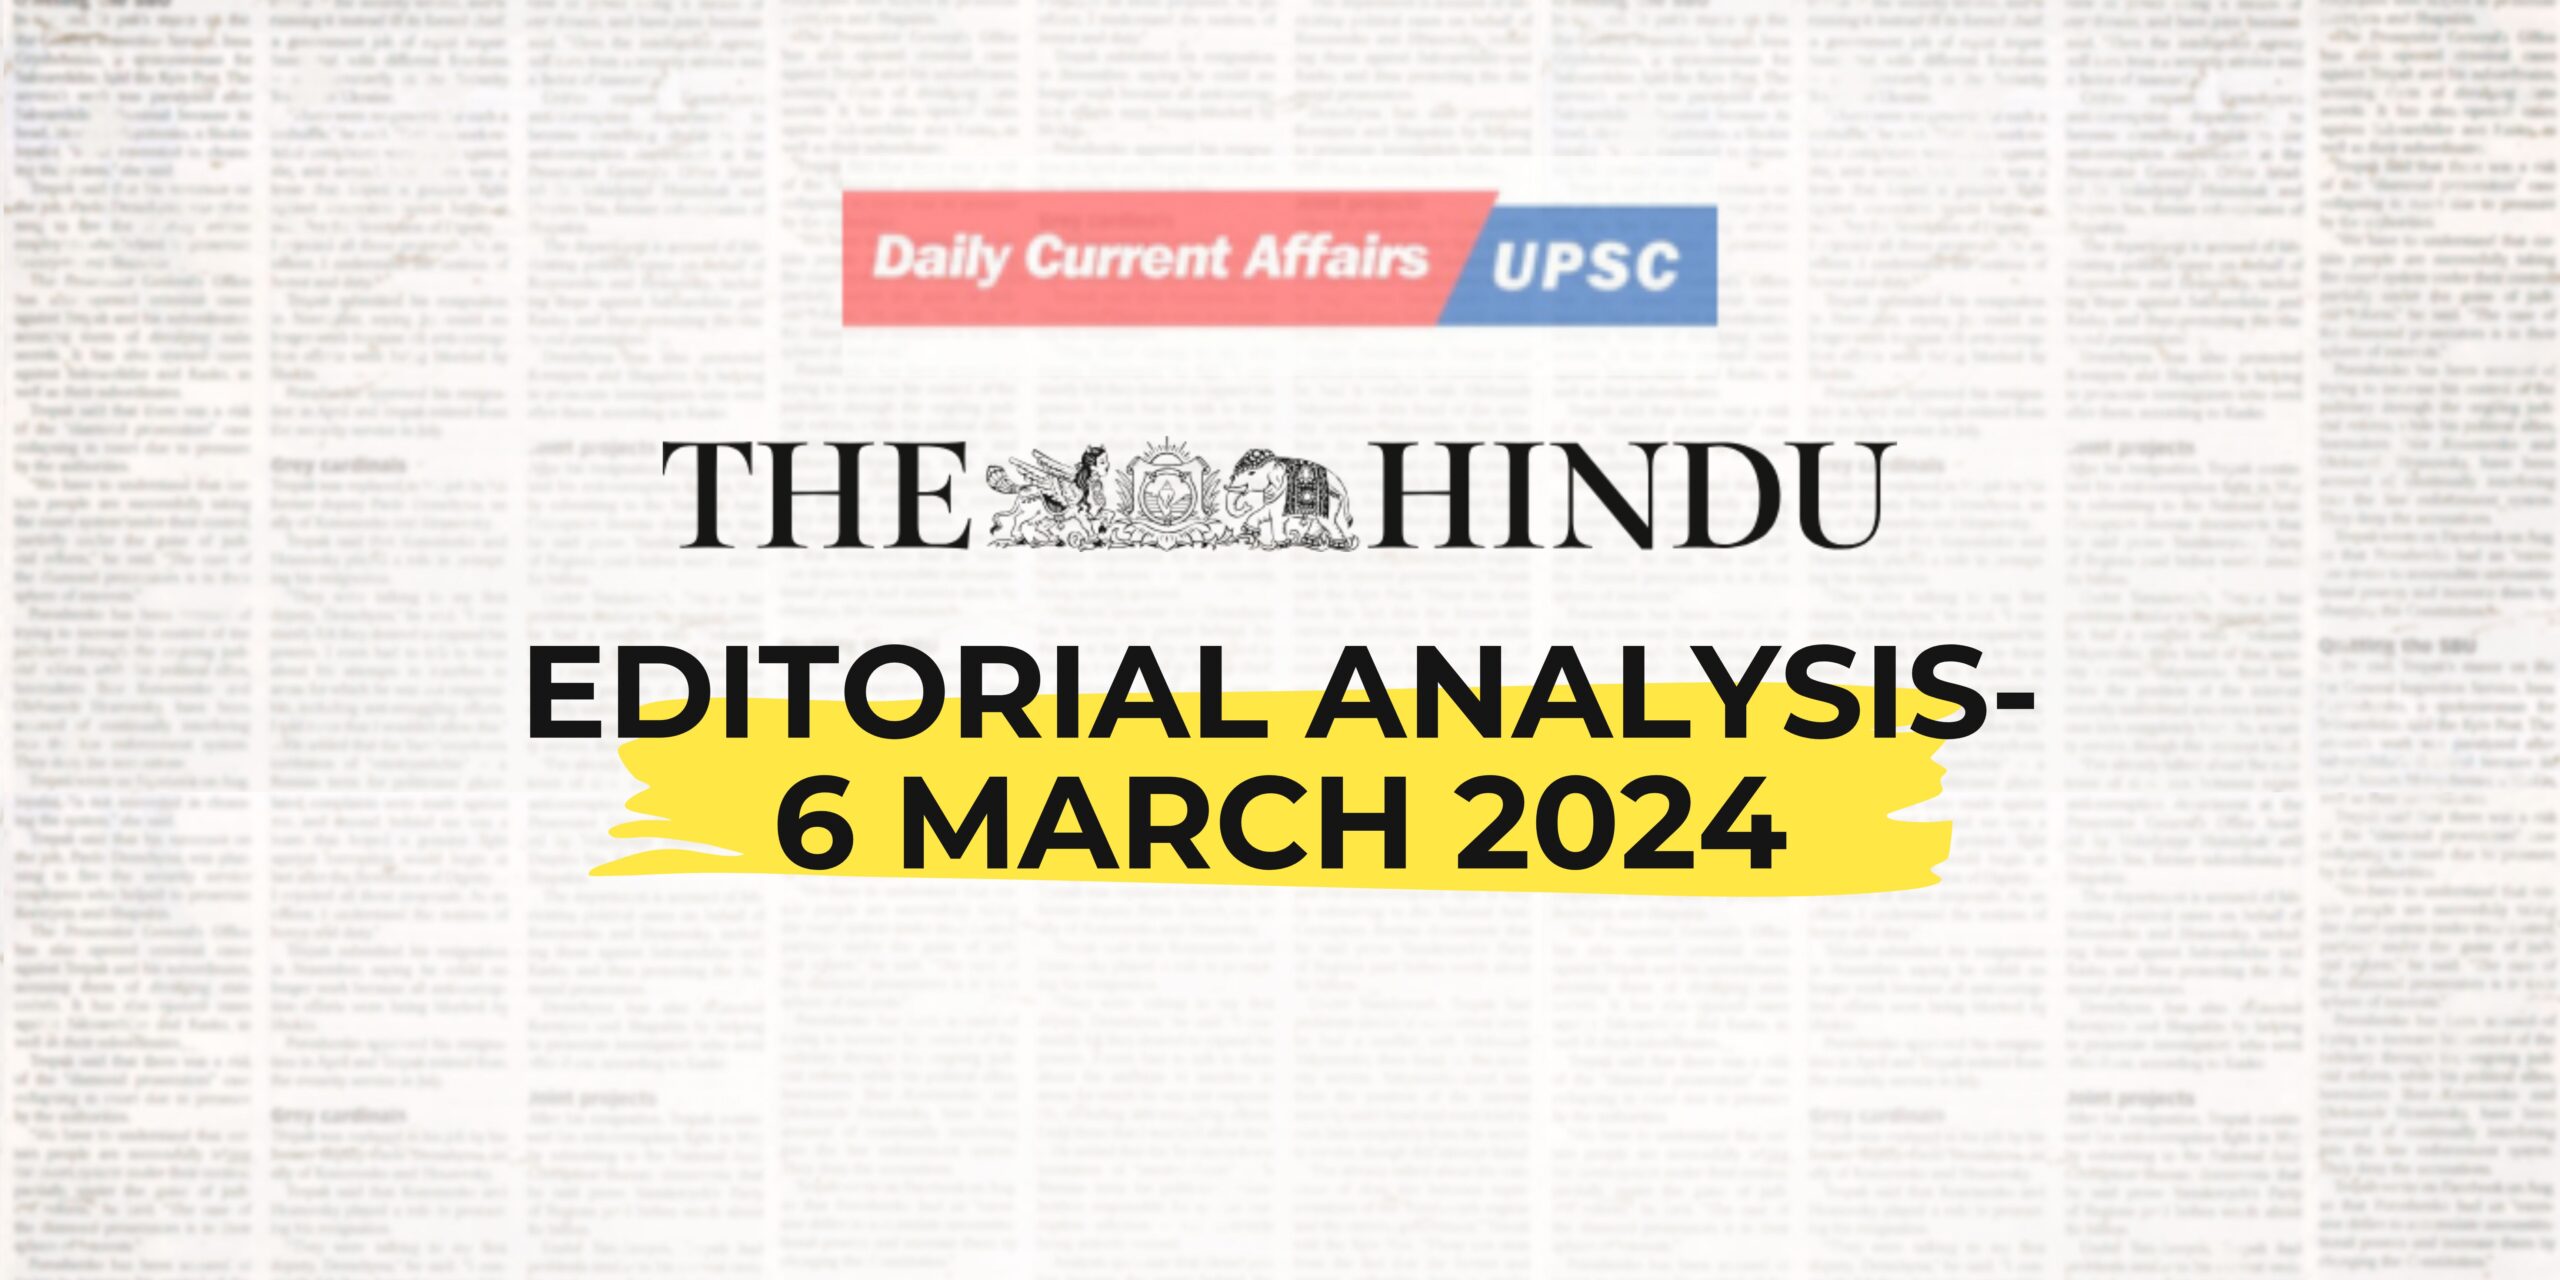 The Hindu Editorial Analysis- 6 March 2024